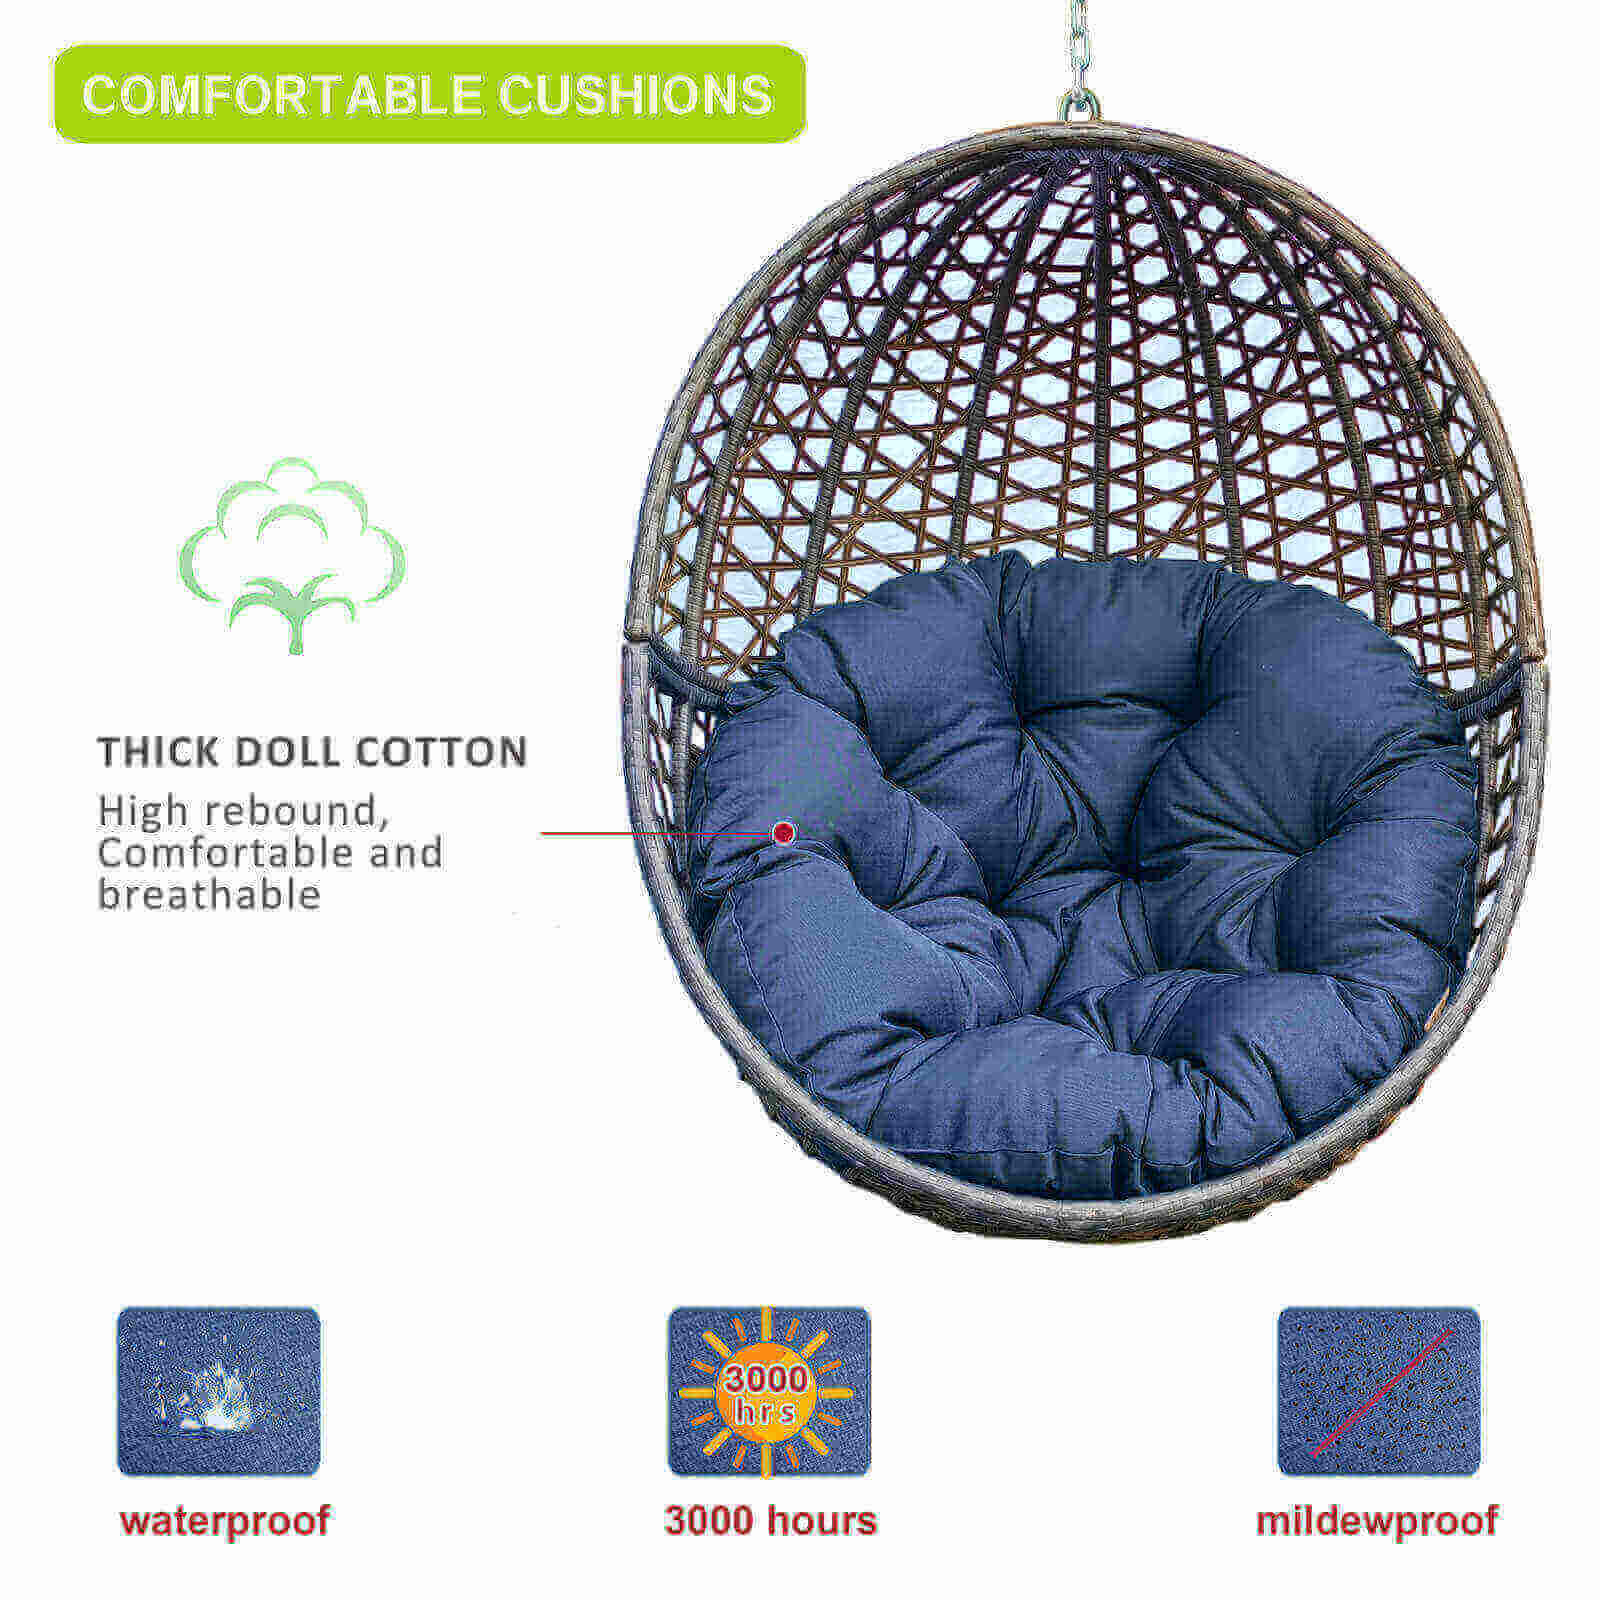 Outdoor Swing Hanging Egg Chair / Heavy Duty Wicker Porch Swing Sets / Outdoor Patio Balcony Garden Decoration